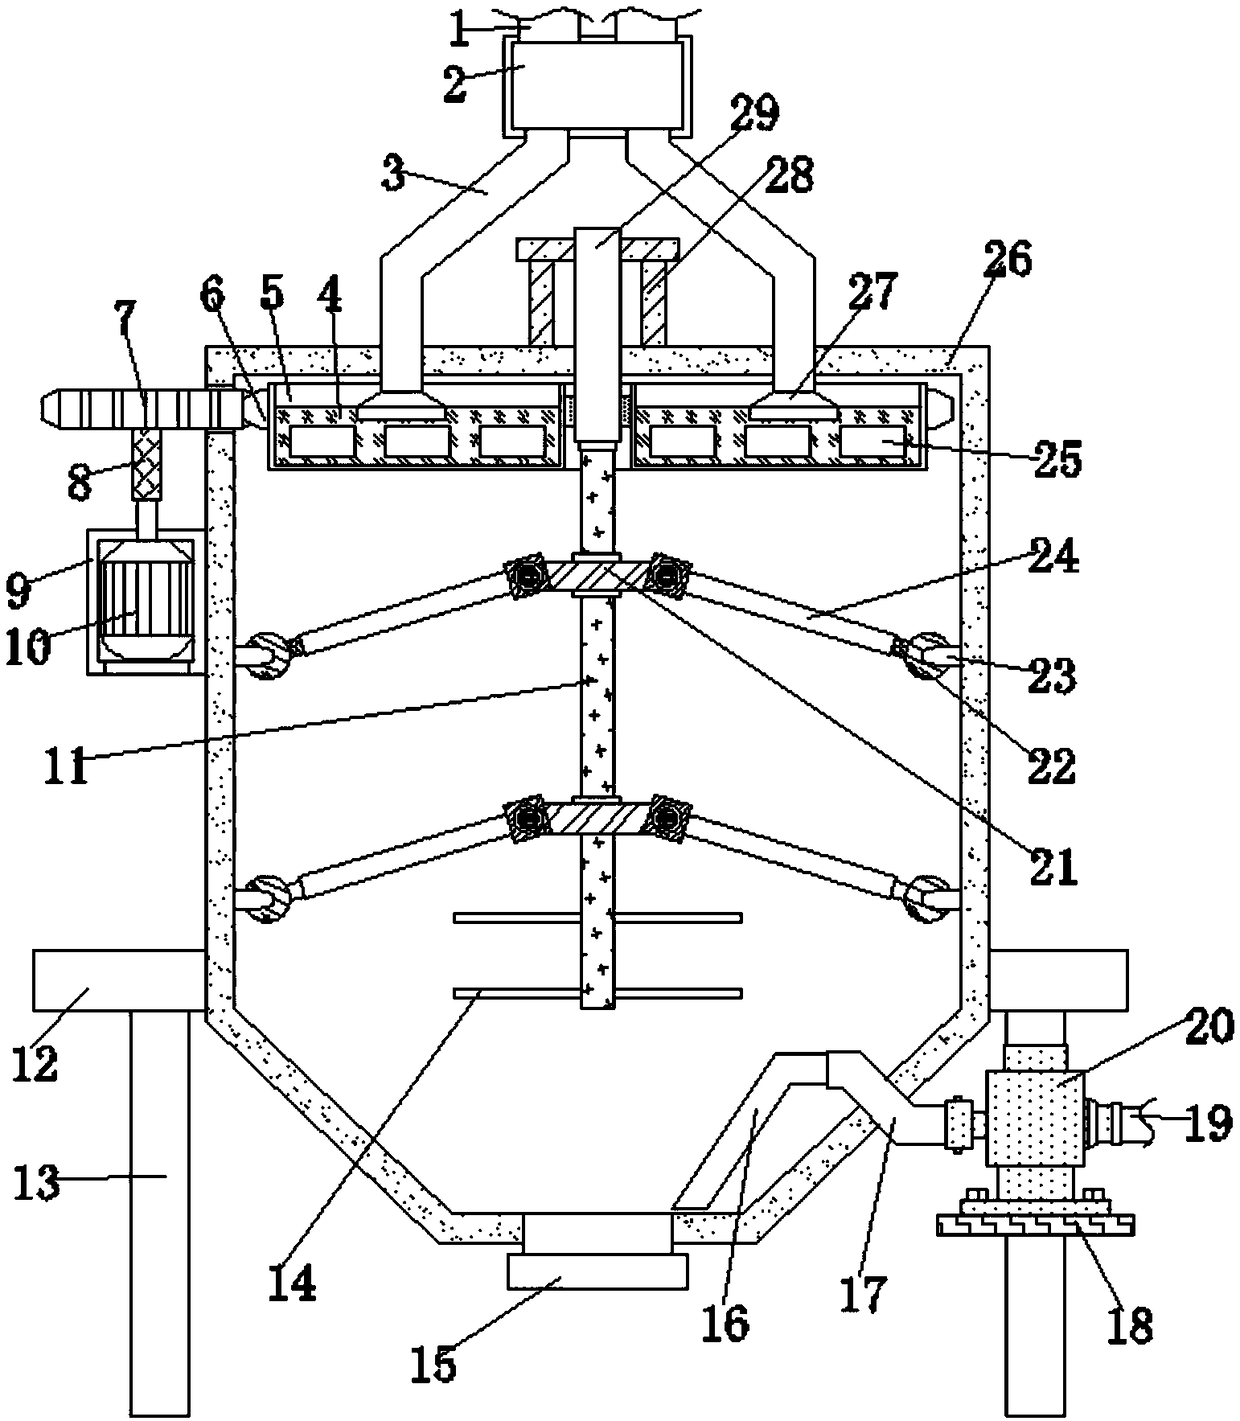 Uniformly-mixing stirring device for medical technology development